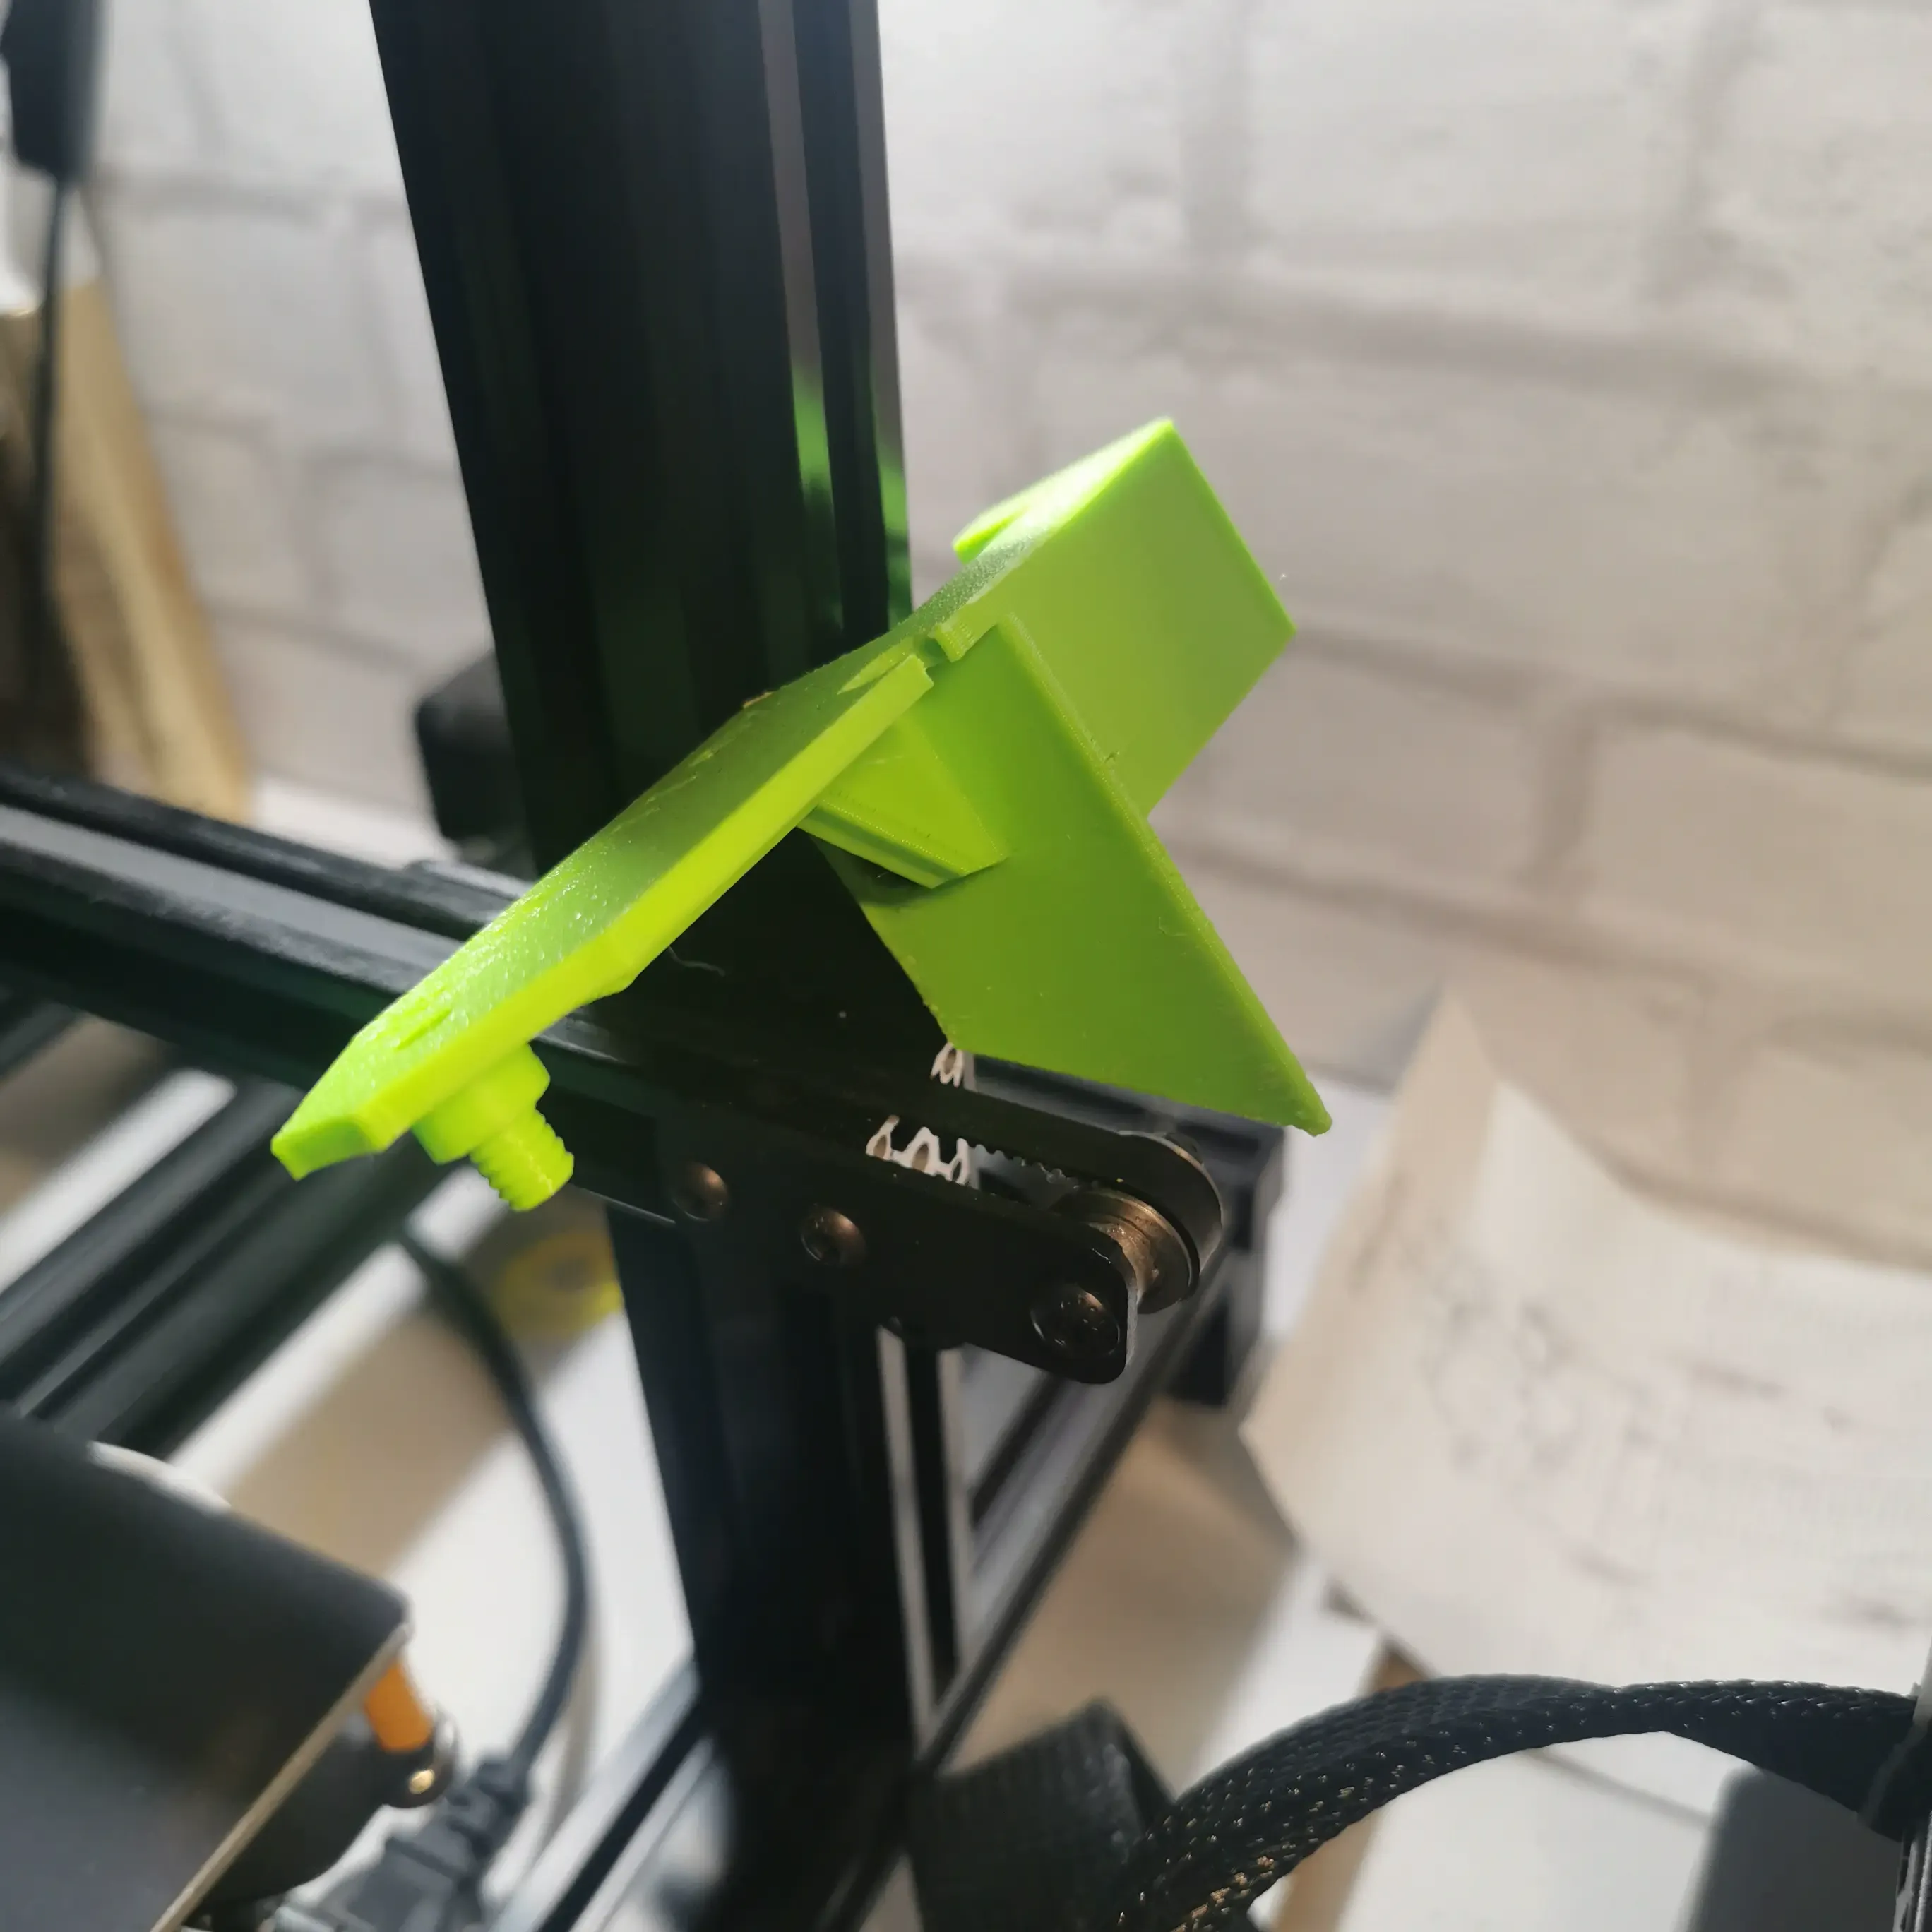 Z-Axis Pro Camera Mount - To Suit Enders And Clones